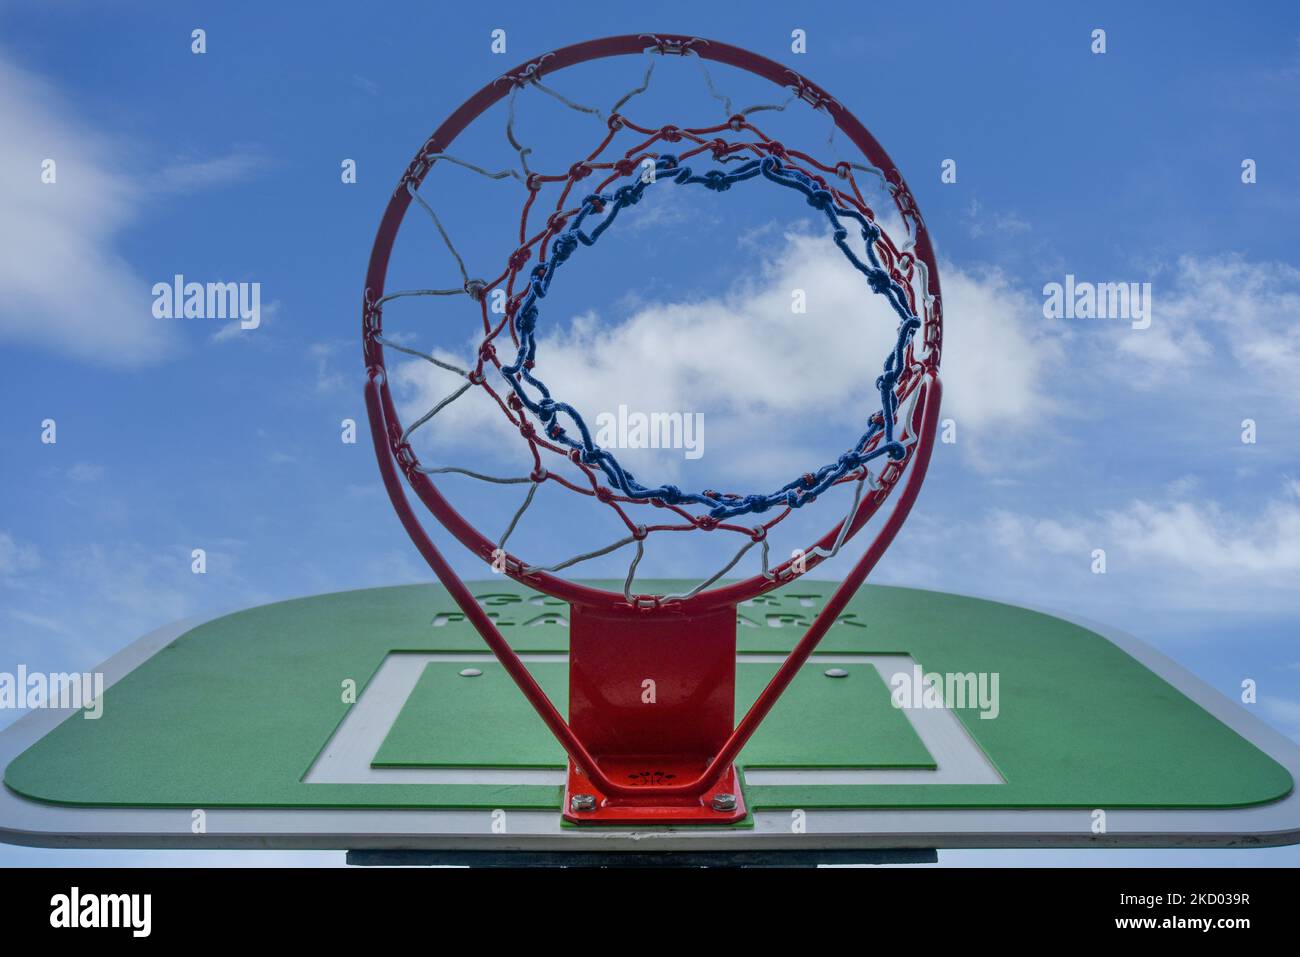 Looking skywards through a basketball hoop towards a blue sky with white clouds. Stock Photo